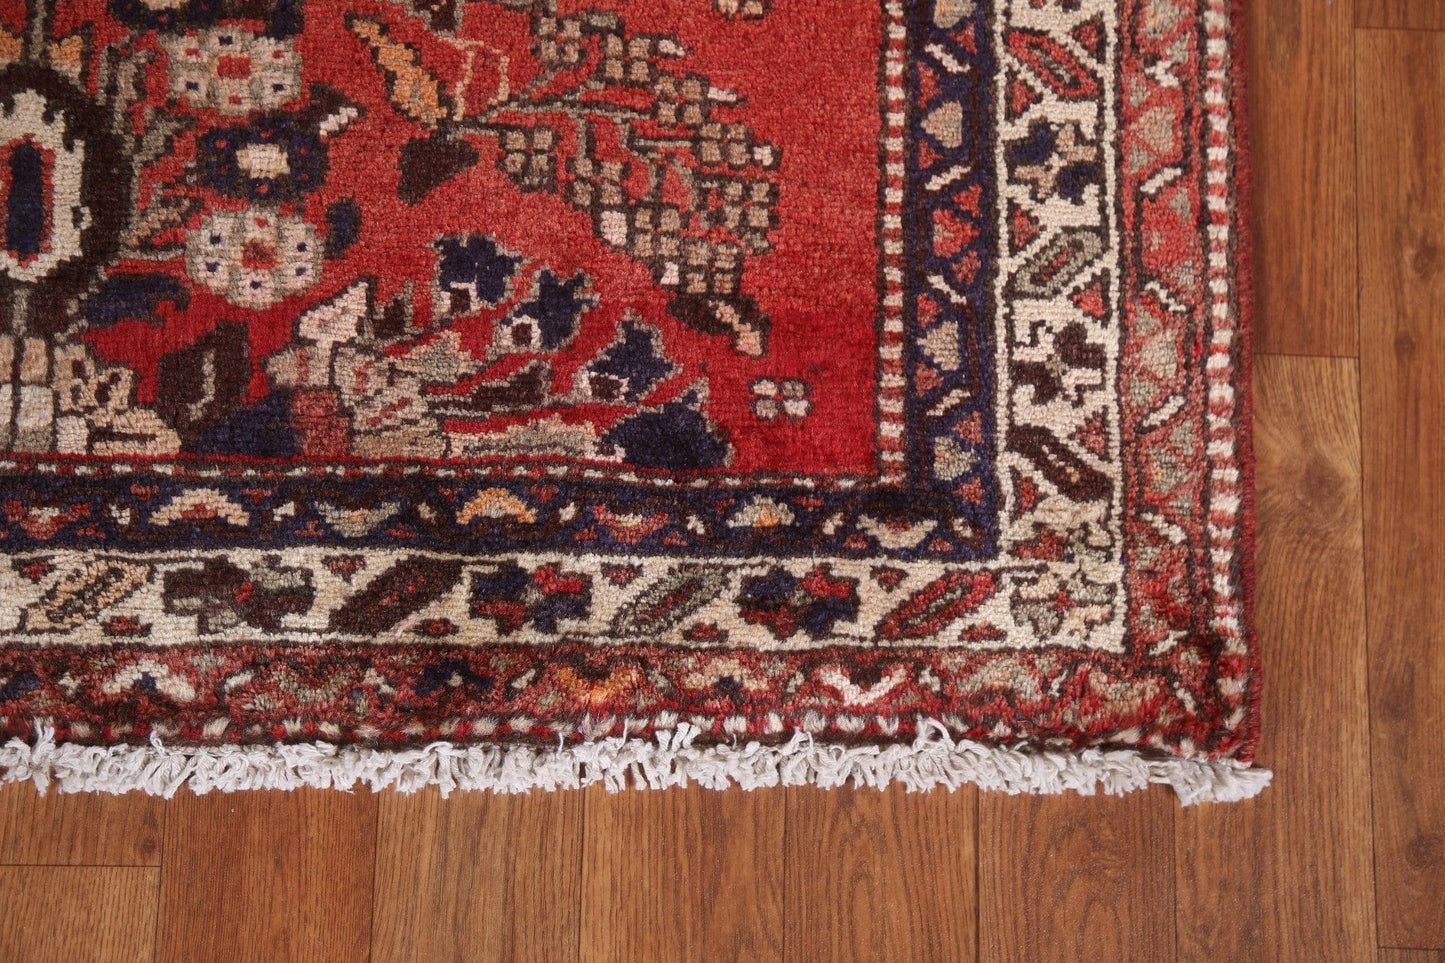 Floral Red Lilian Persian Runner Rug 3x10